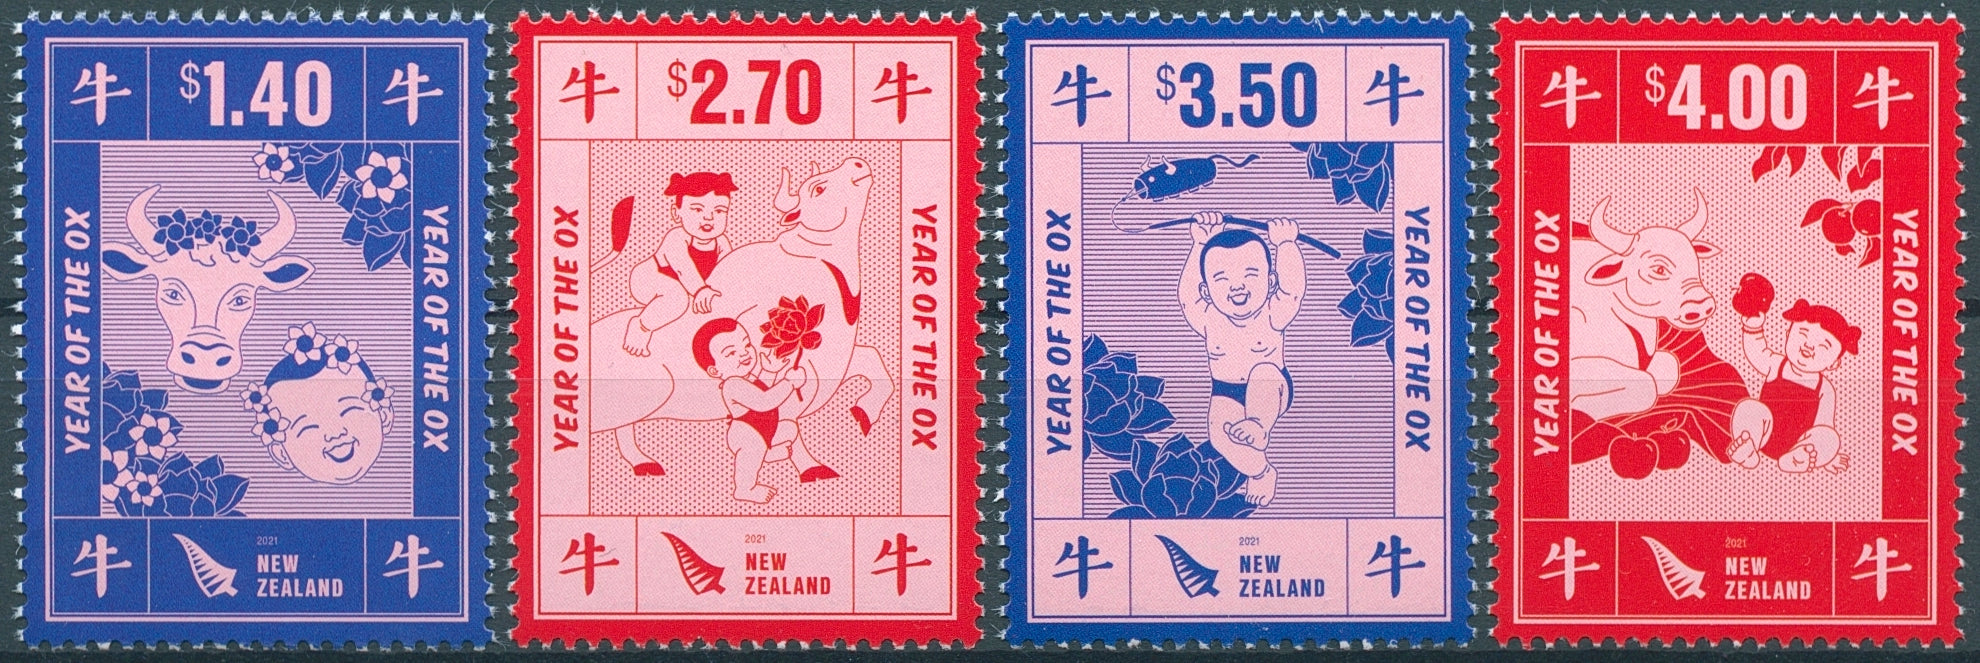 New Zealand NZ Year of Ox Stamps 2021 MNH Chinese Lunar New Year 4v Set